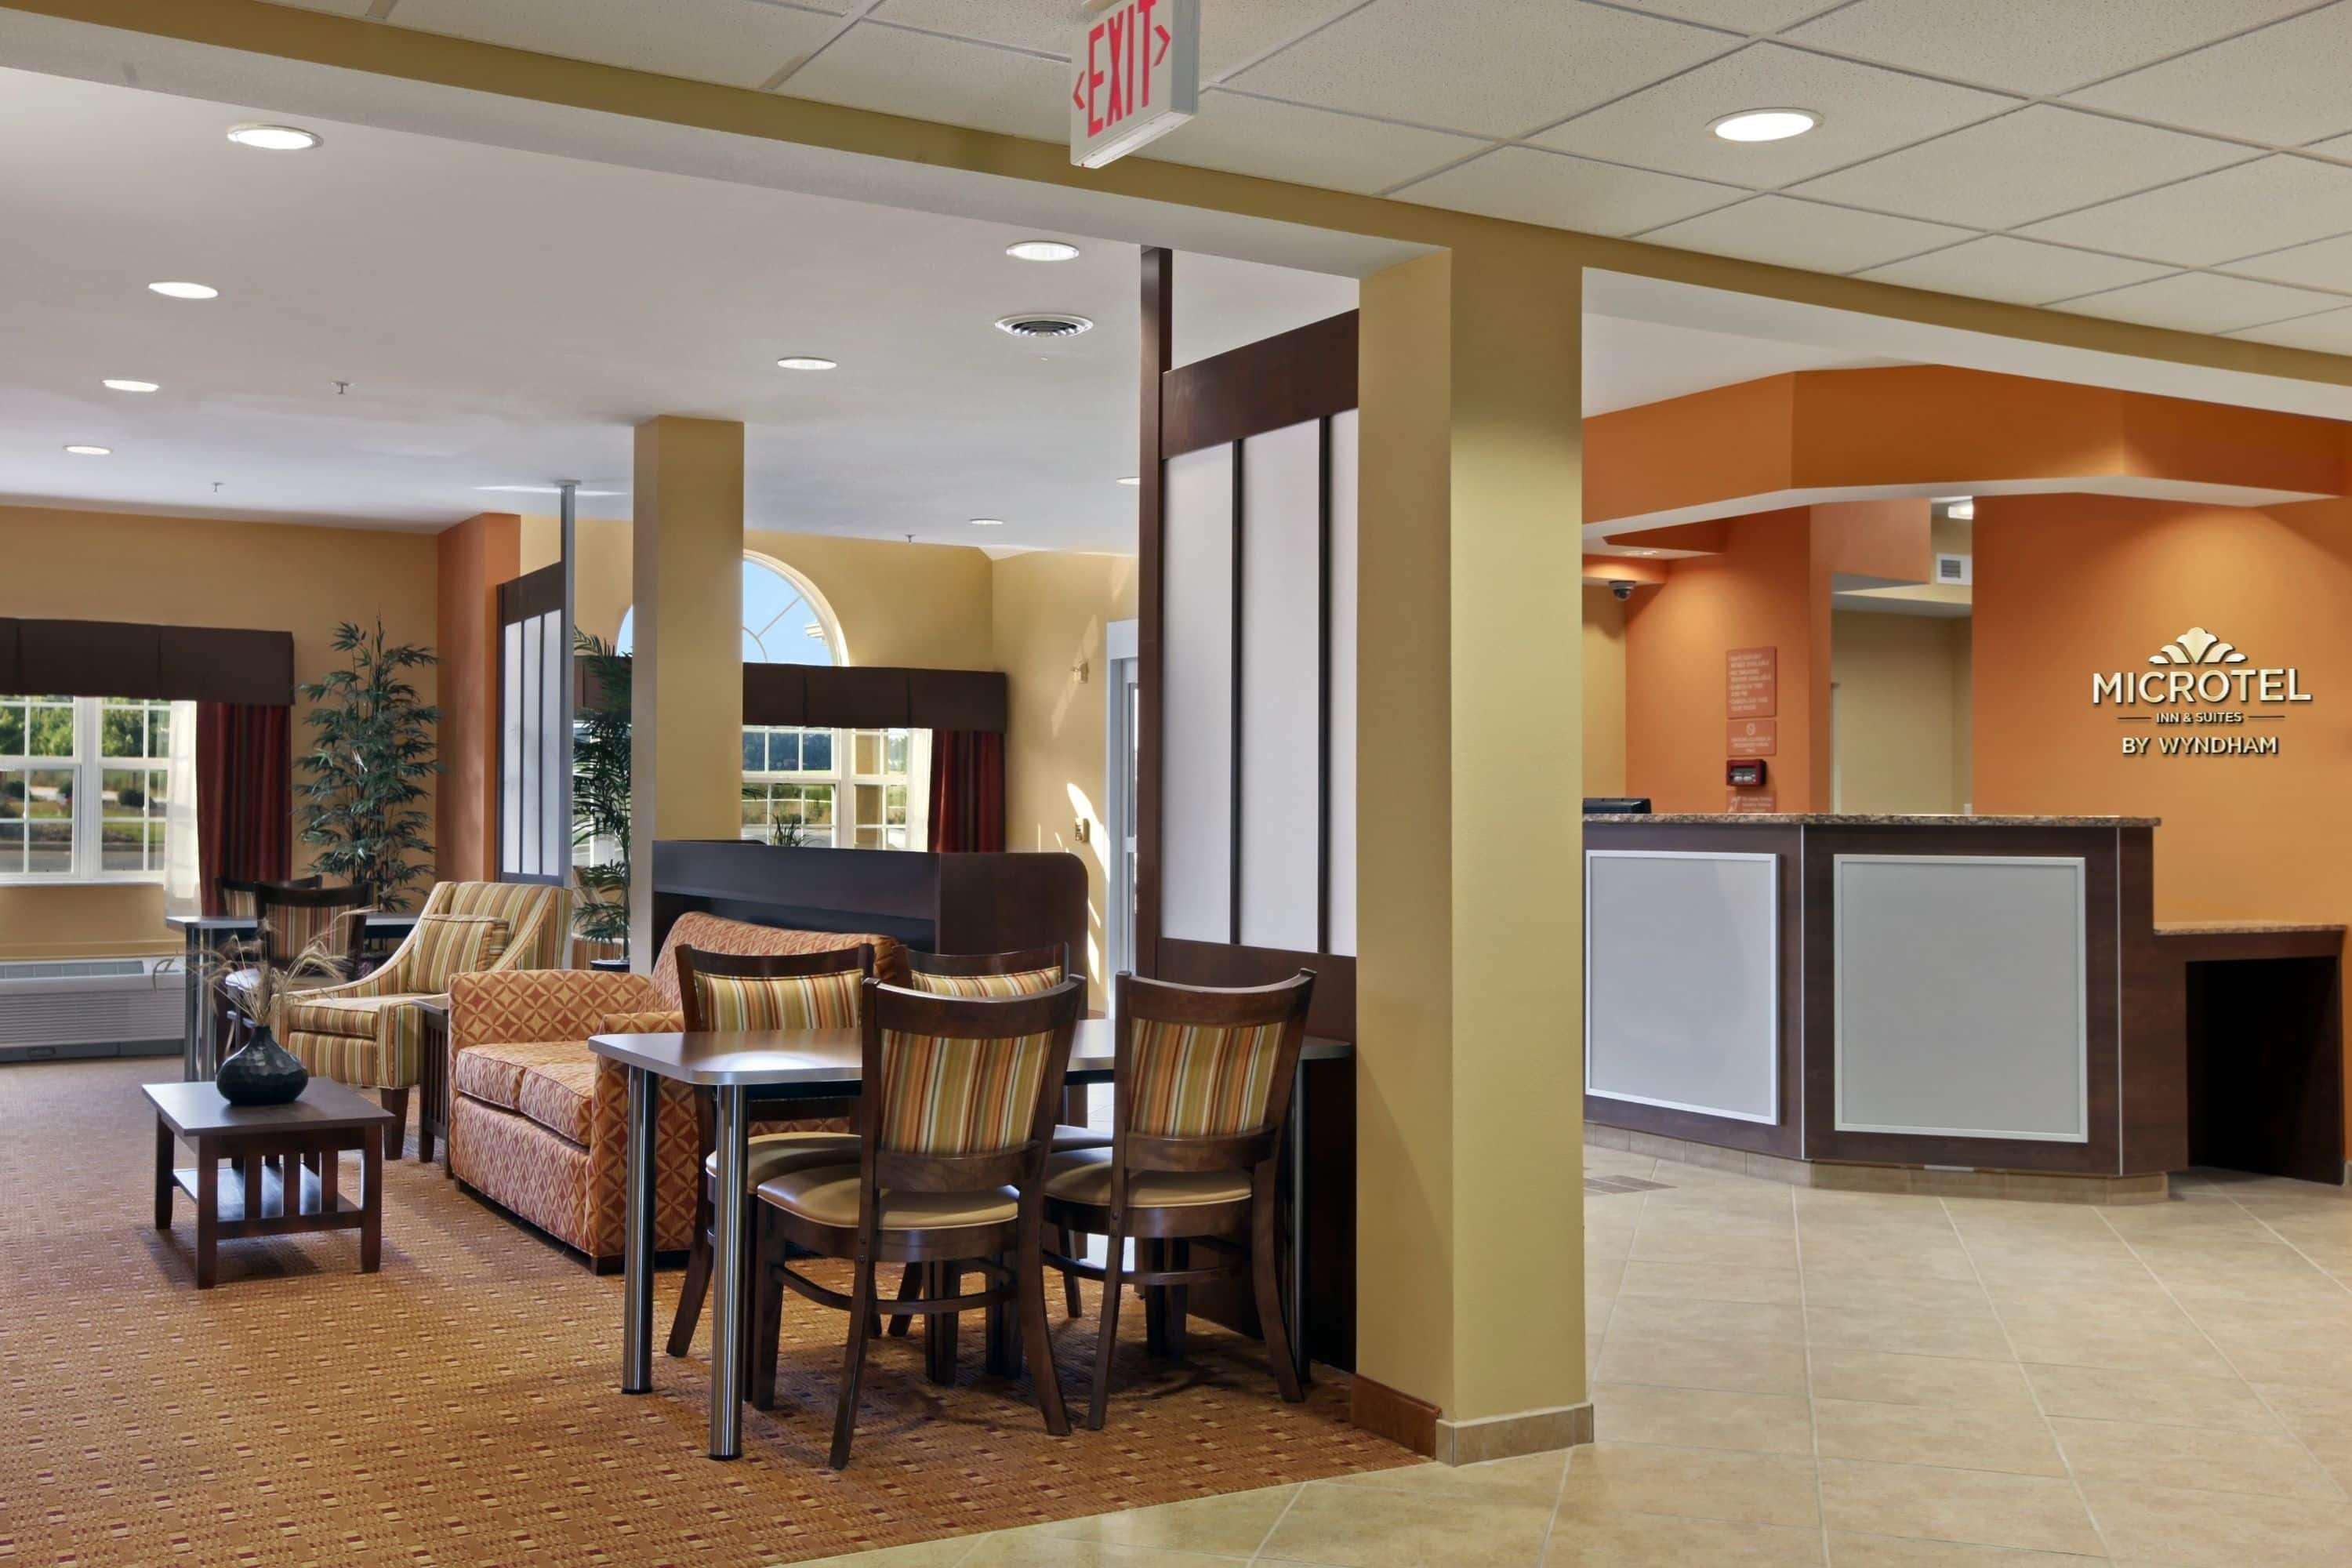 Microtel Inn And Suites By Wyndham Anderson Sc Interno foto